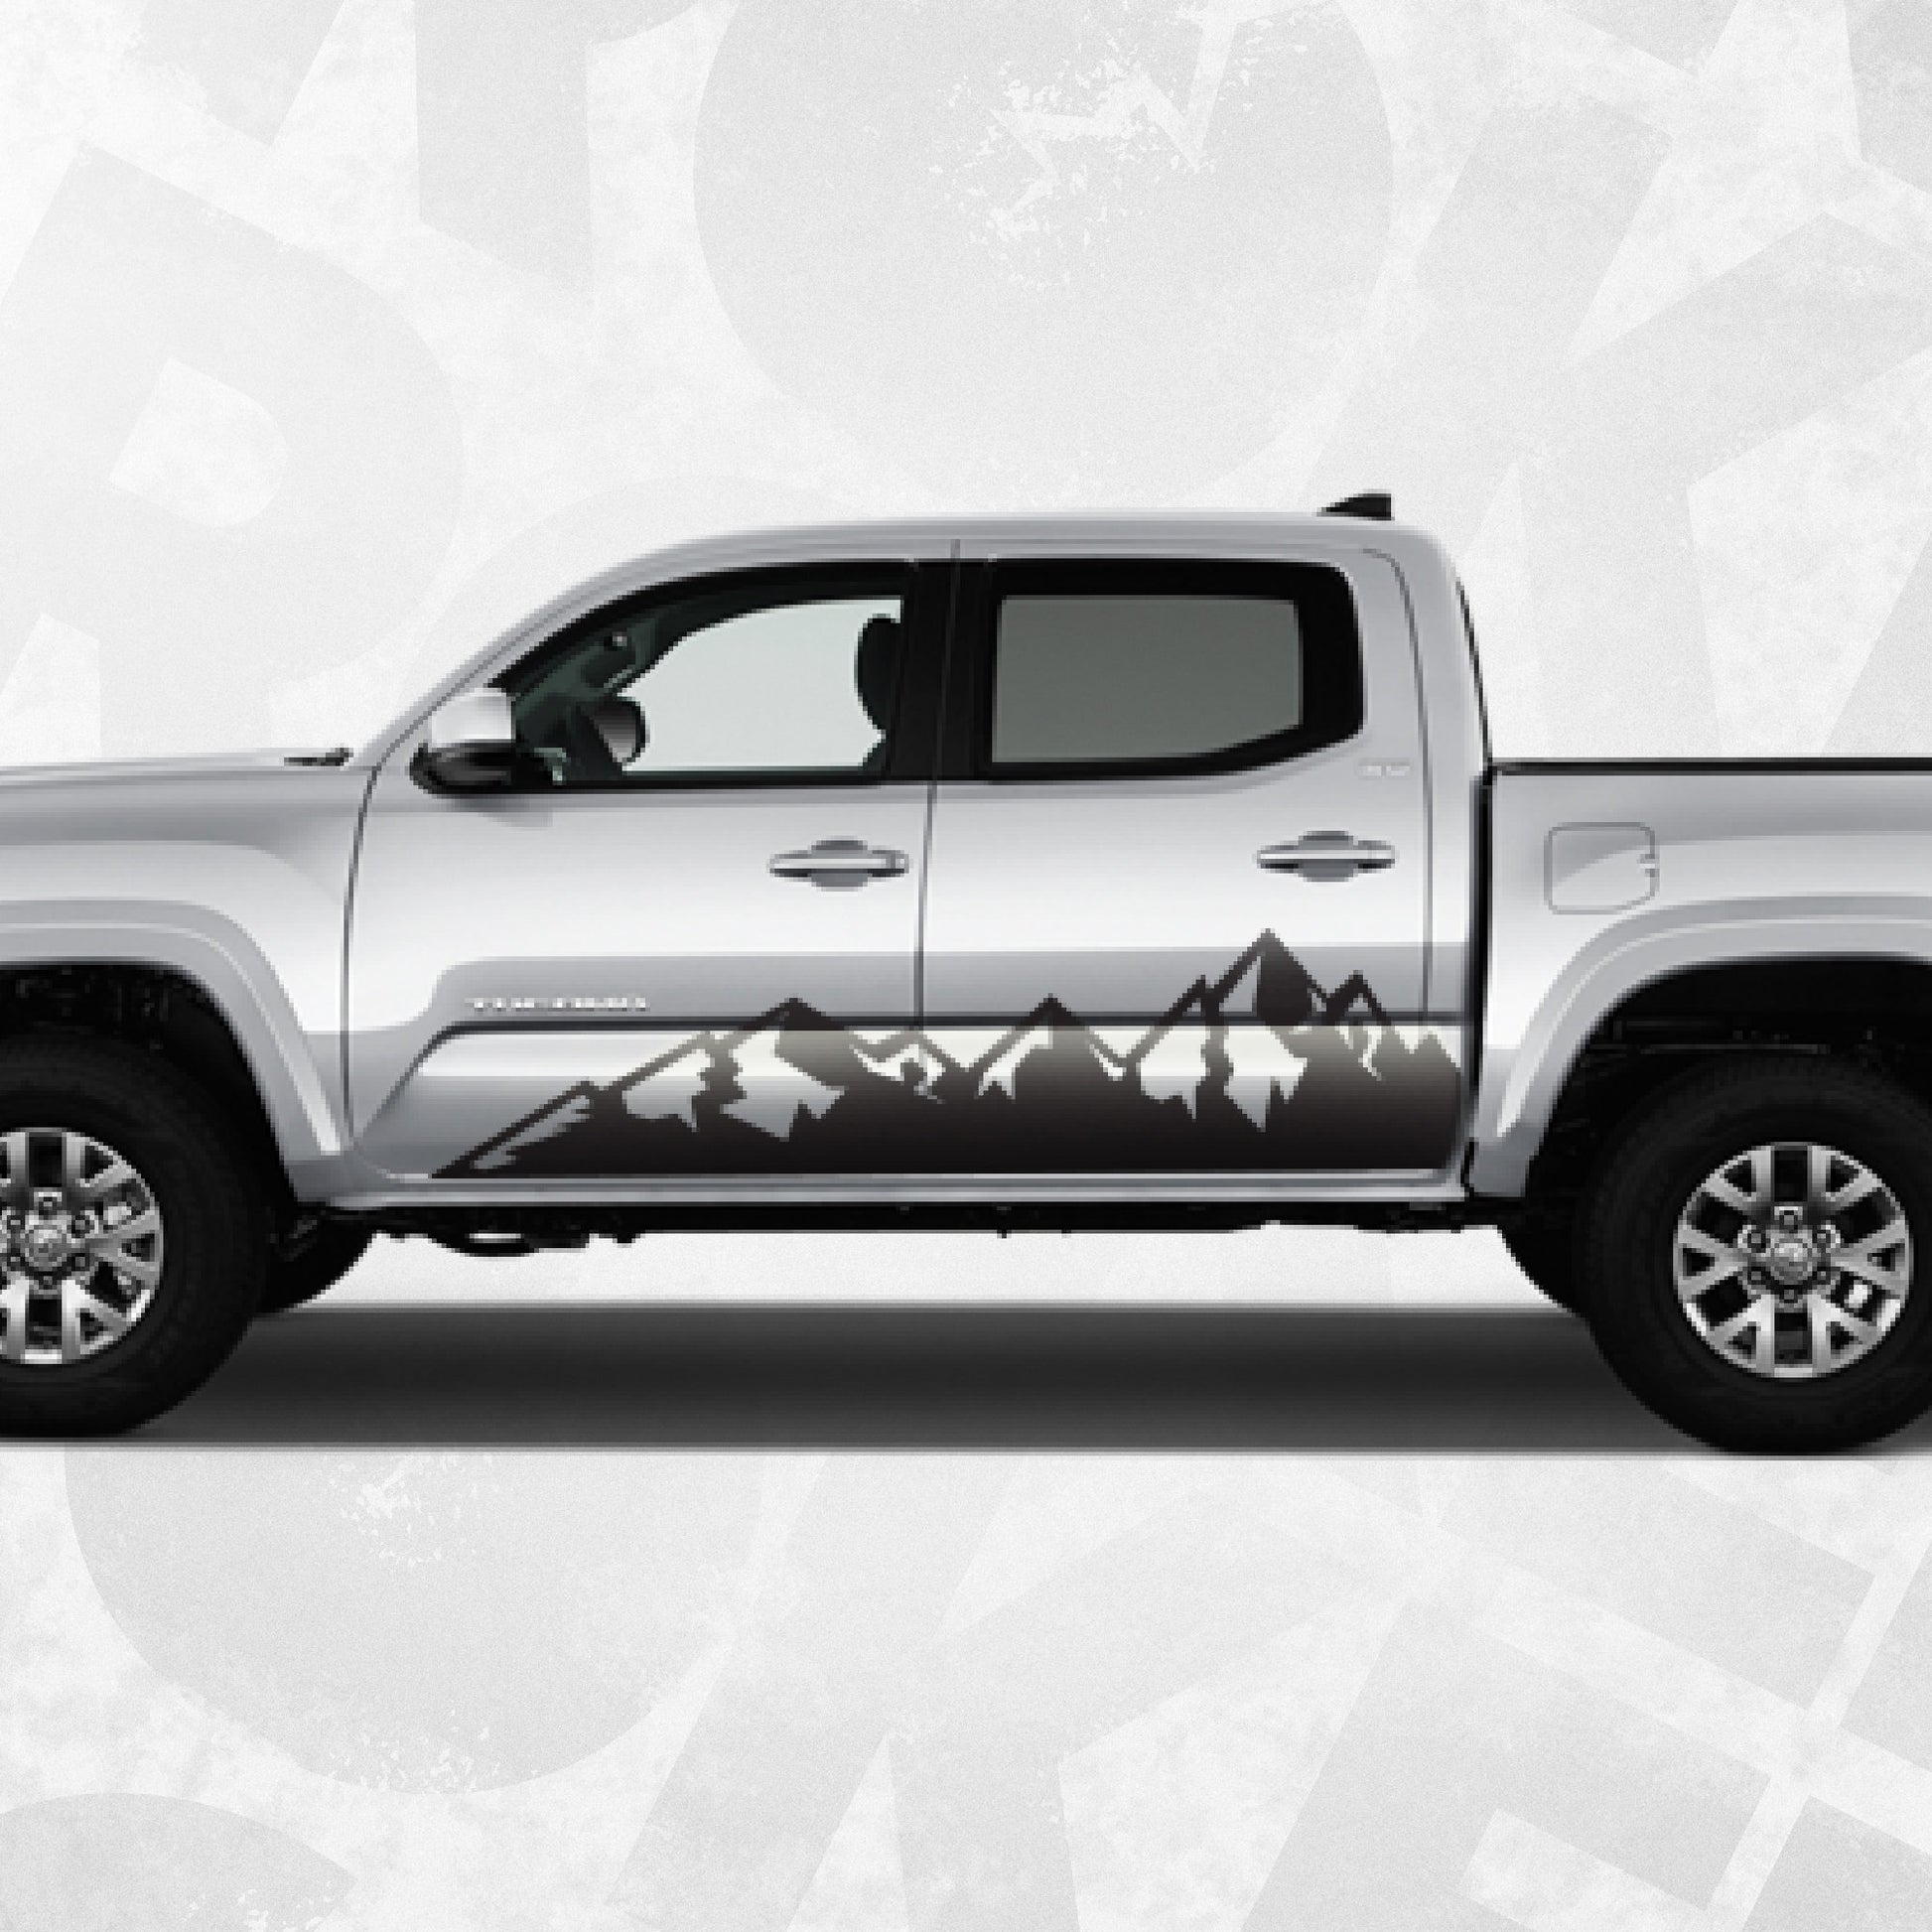 Toyota Tacoma Decal, Mountain Scenery Graphic kit Side Decals, Vinyl Sticker, Toyota Tacoma Accessories, Set of 2